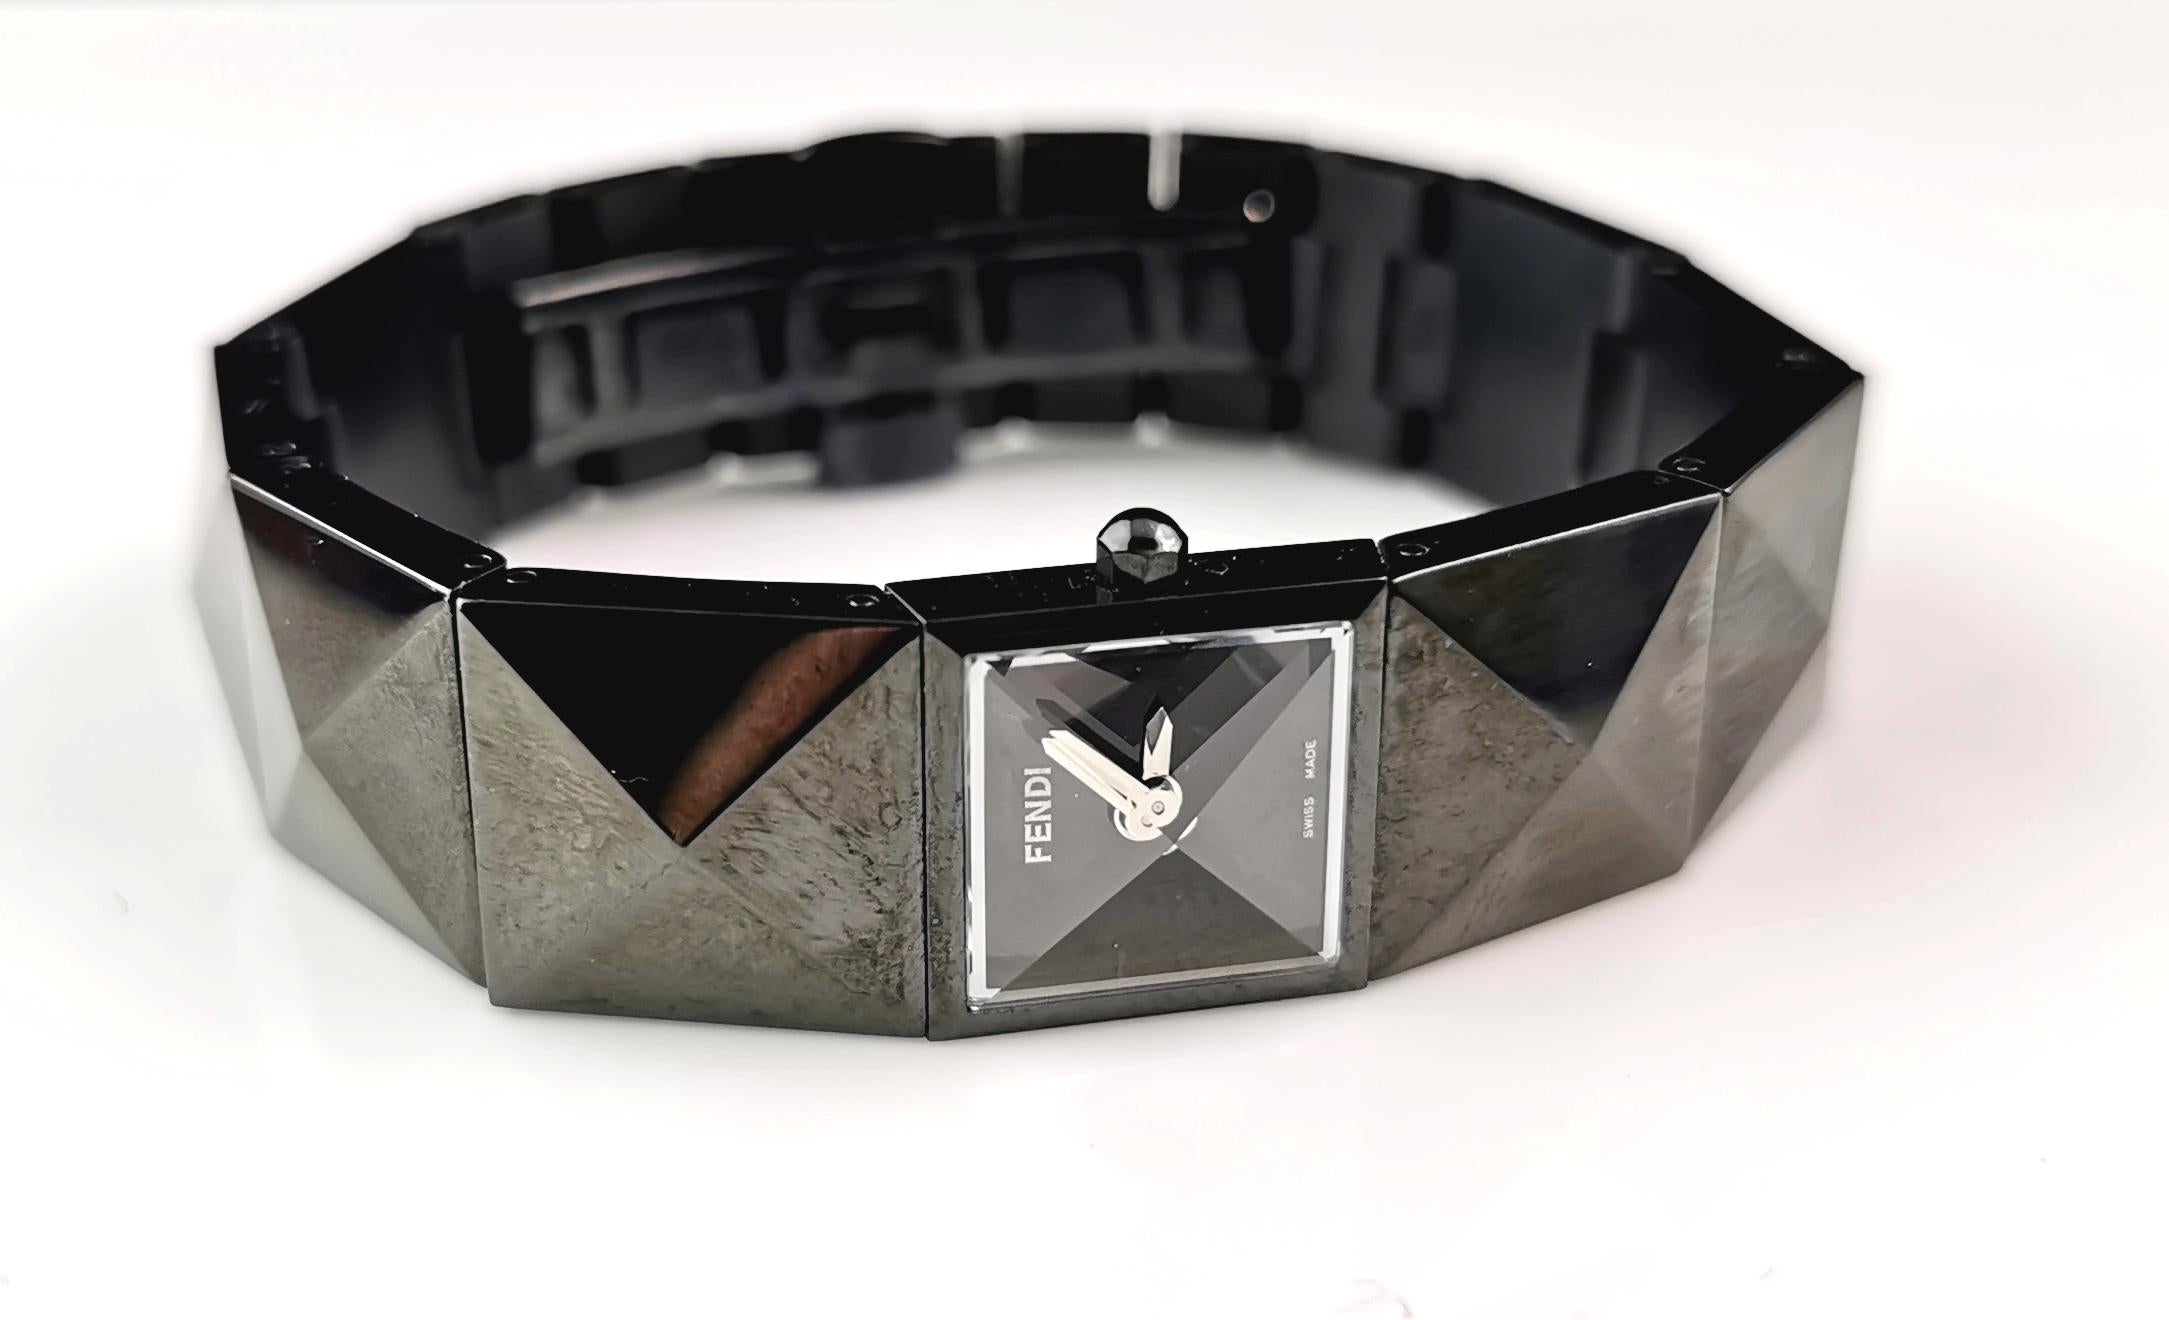 A stylish and iconic ladies Fendi 4270 l wristwatch.

It is a black ion plated steel bracelet watch with a unique pyramid design link that really makes this watch stand out.

It has a small pyramid domed glazed dial, the dial in black with silver